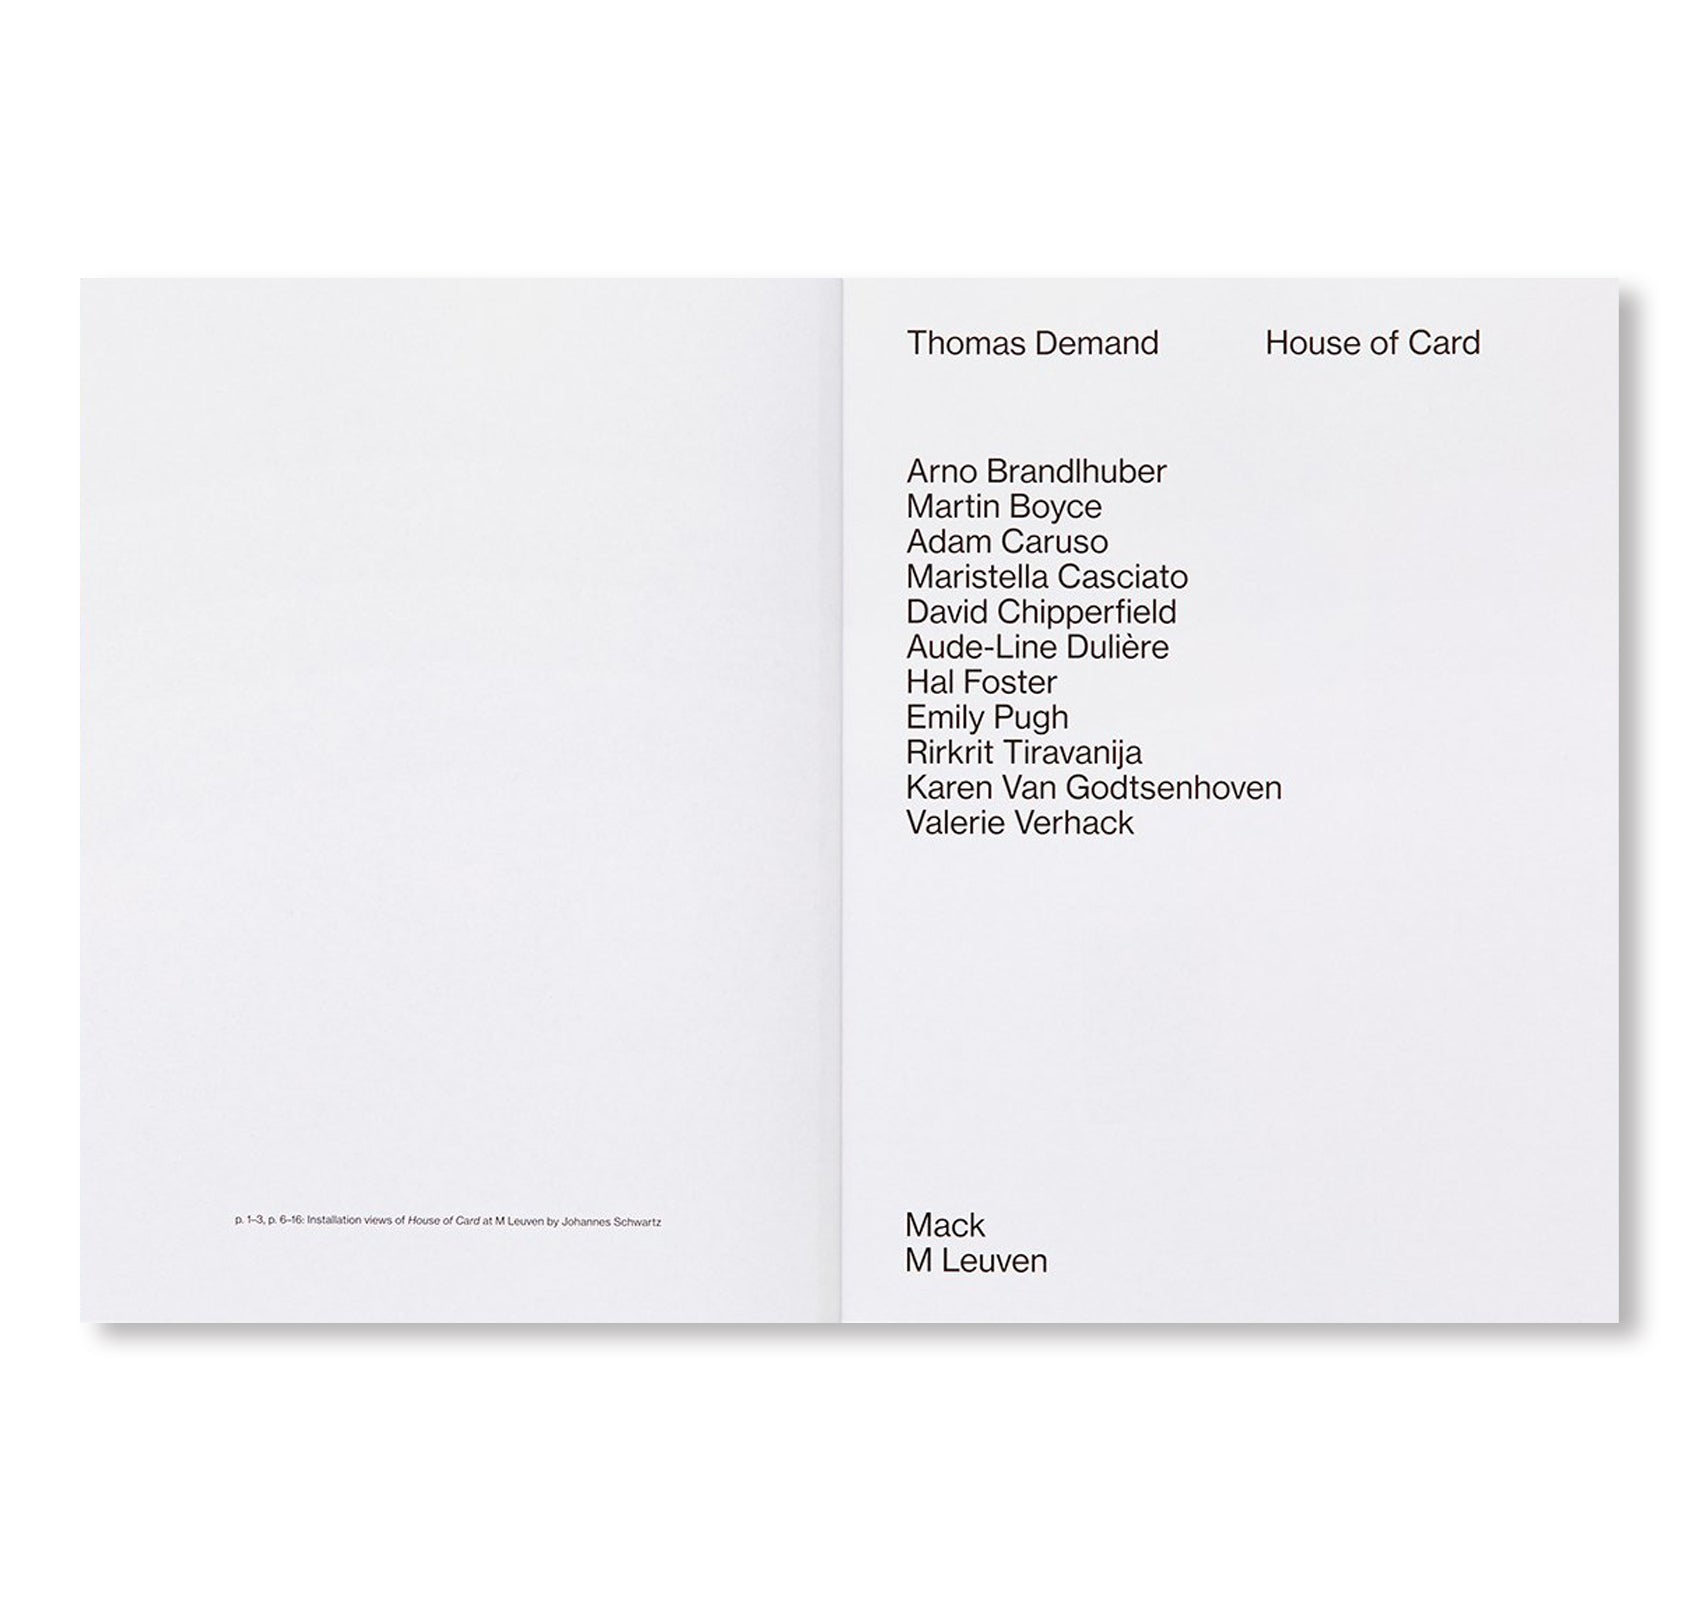 HOUSE OF CARD by Thomas Demand